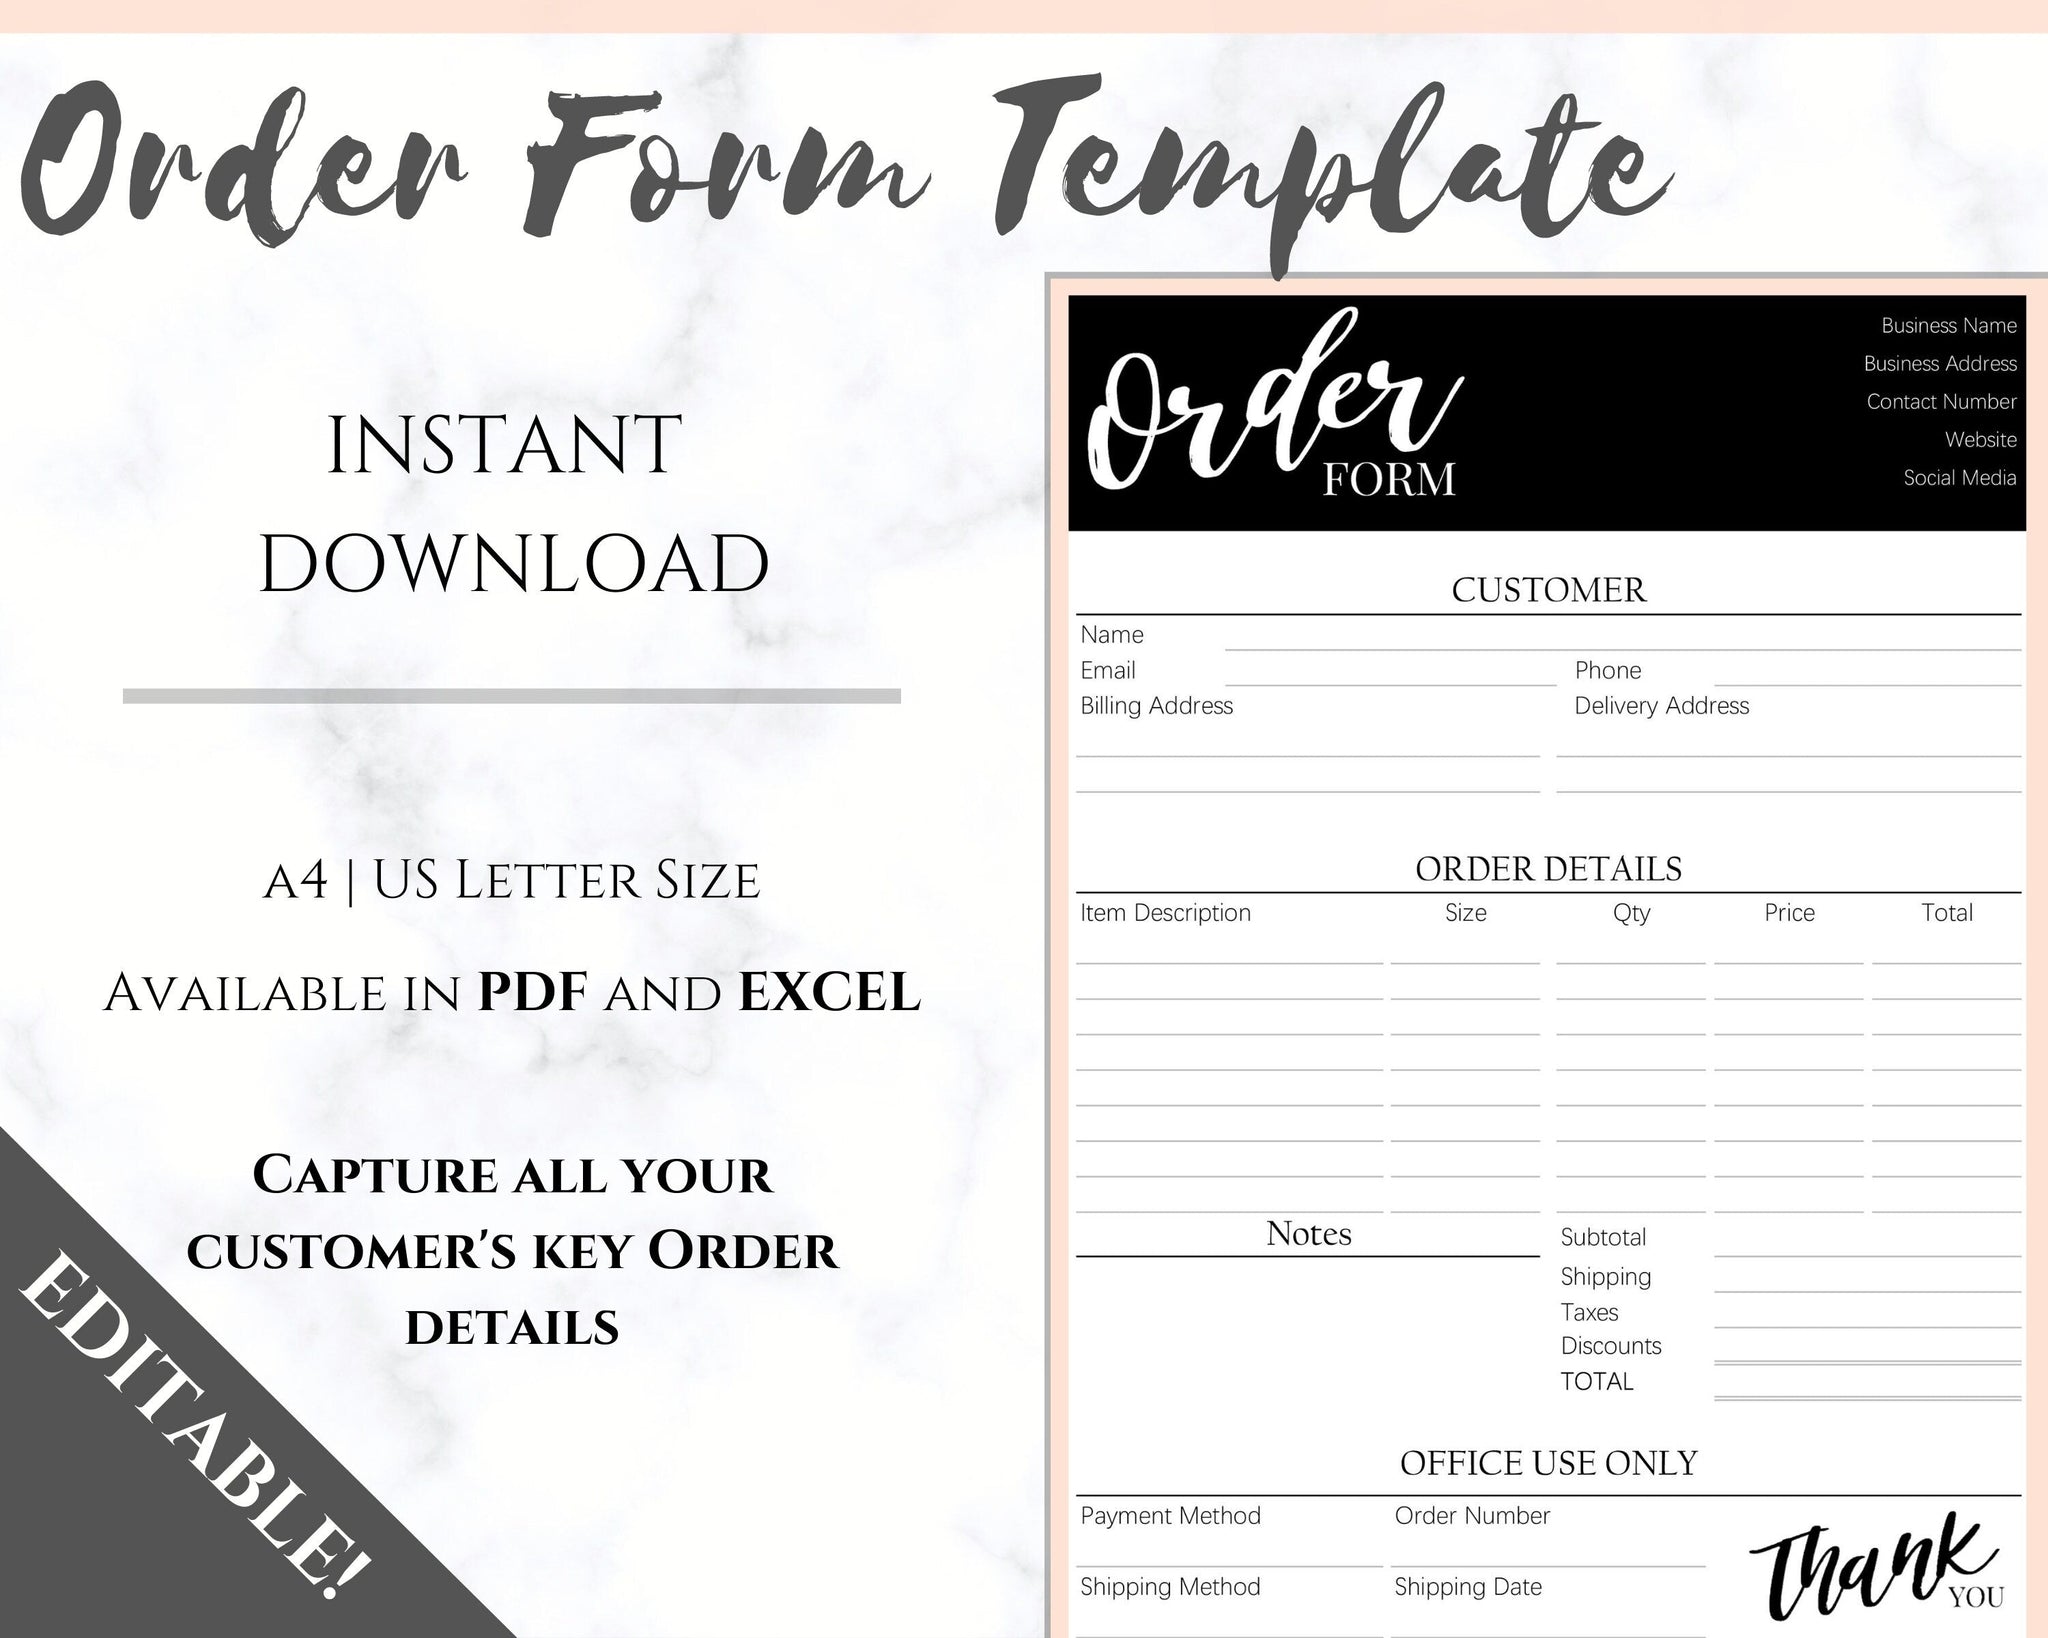 Printable Address Book | US Letter and A4 size PDF | Instant Download